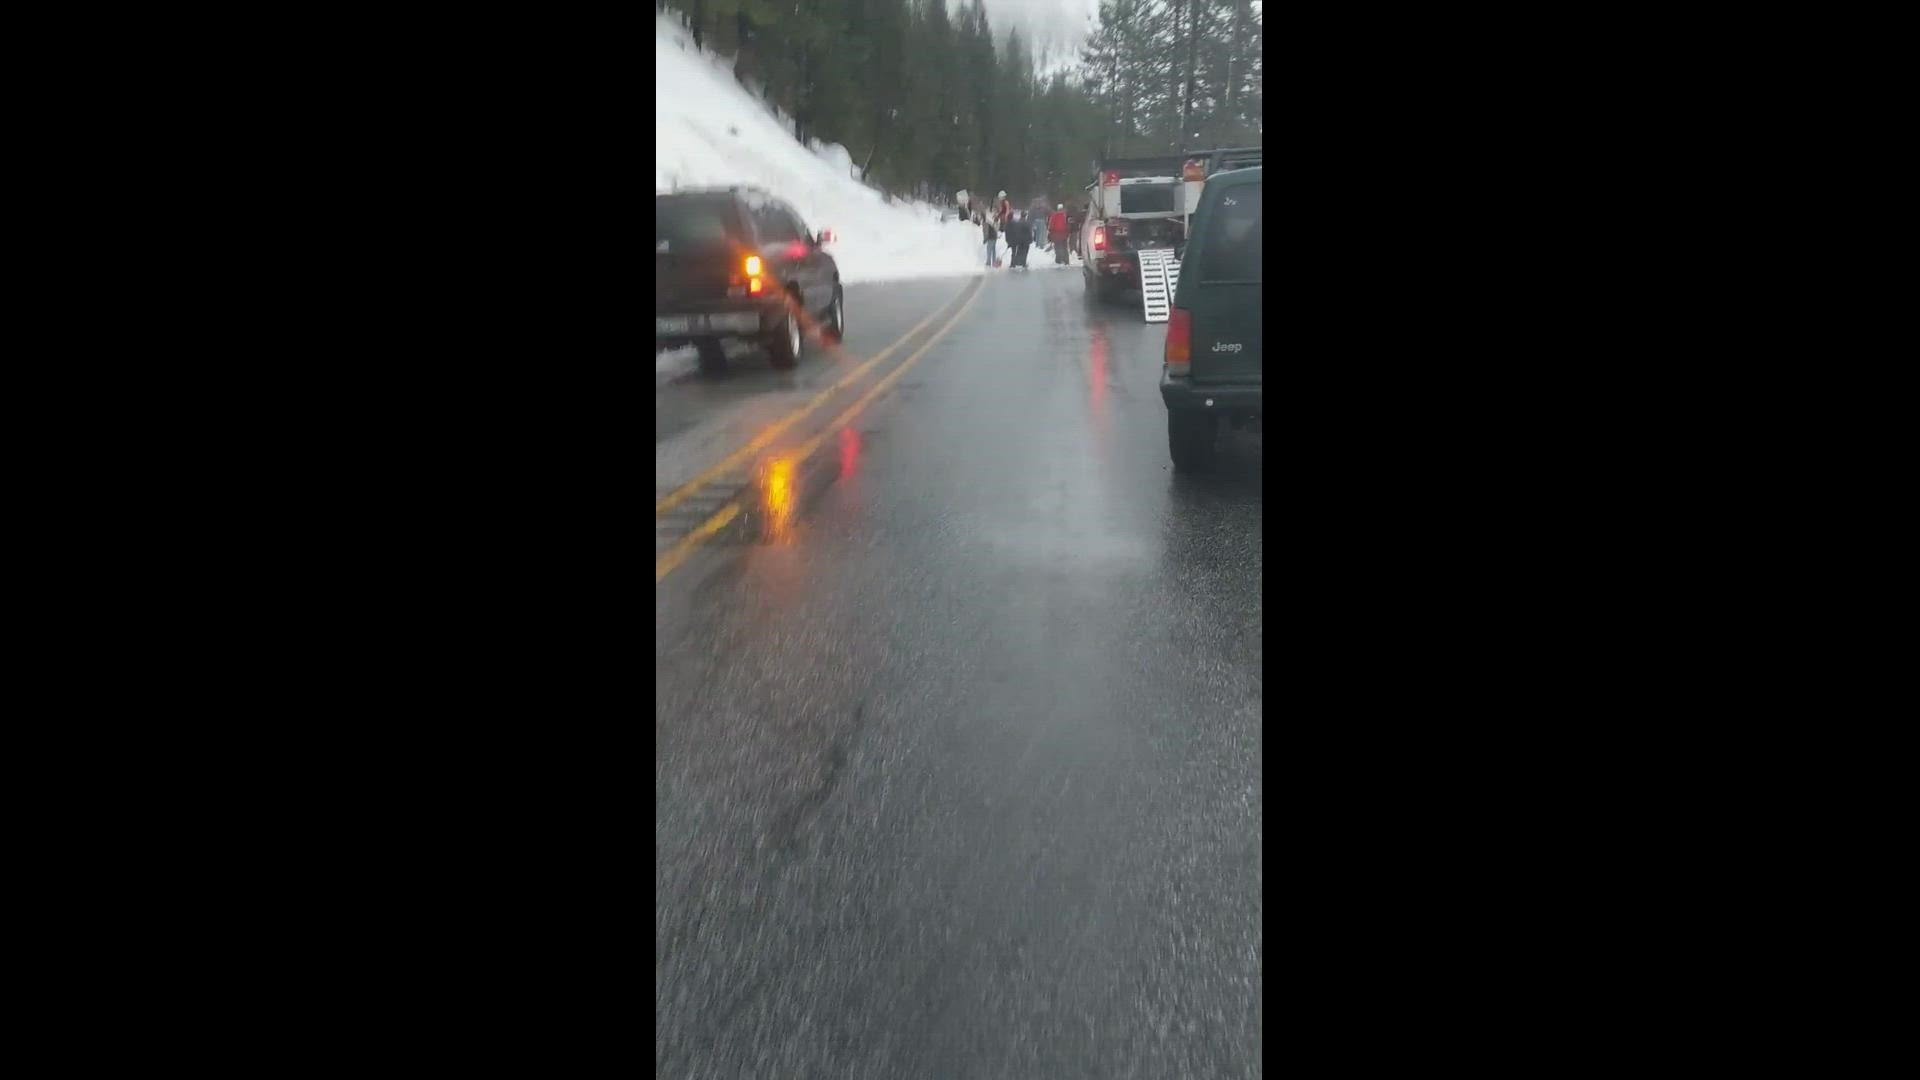 People clear an avalanche from Highway 2 on Jan. 13
Credit: Mark Christainson